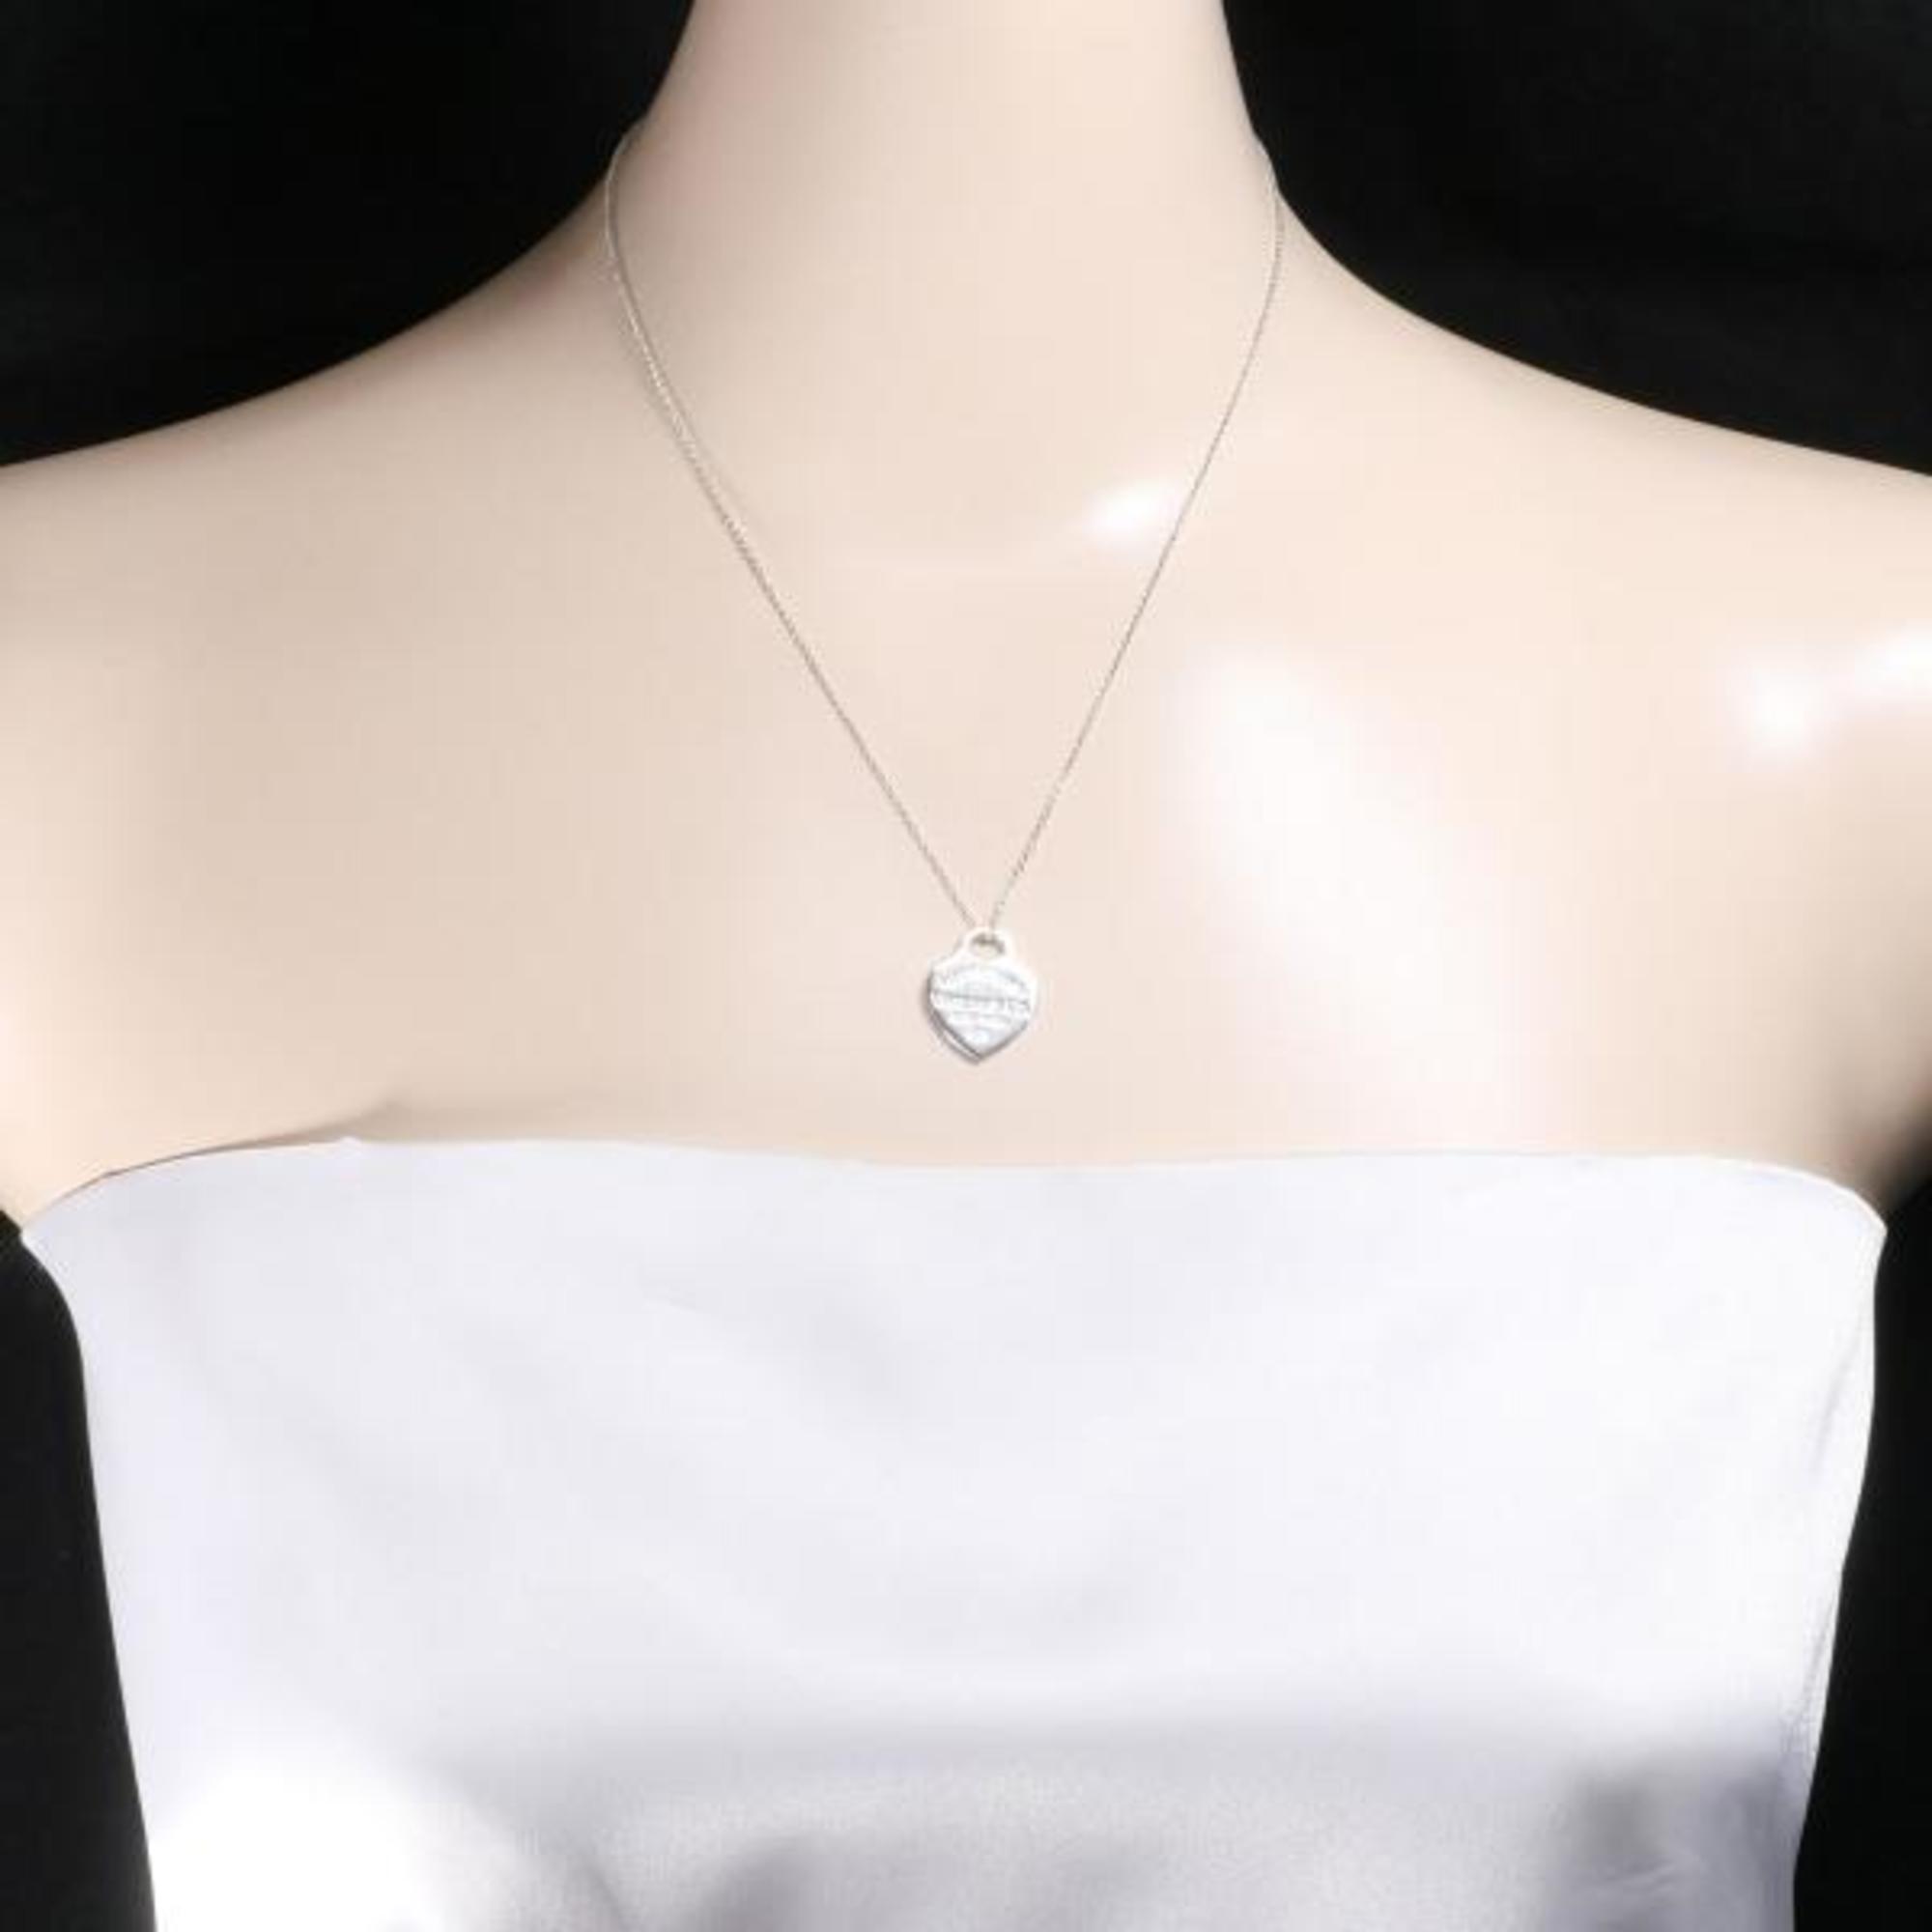 Tiffany Return to Heart Silver Necklace Total Weight Approx. 3.3g 42cm Jewelry